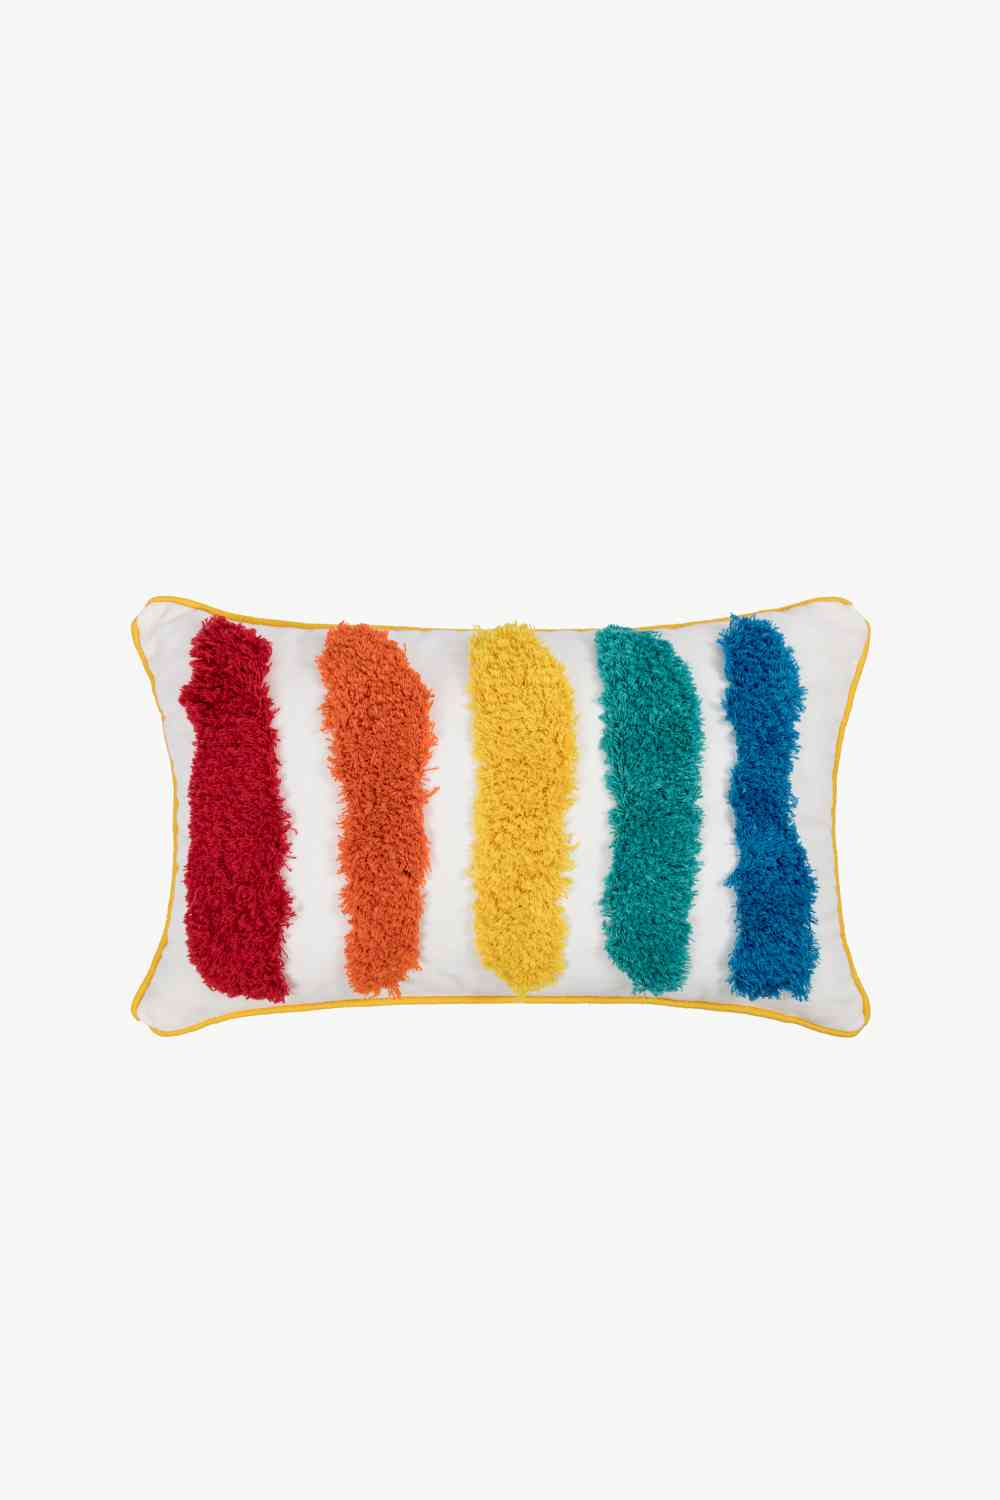 Multicolored Decorative Throw Pillow Case - Tophatter Deals